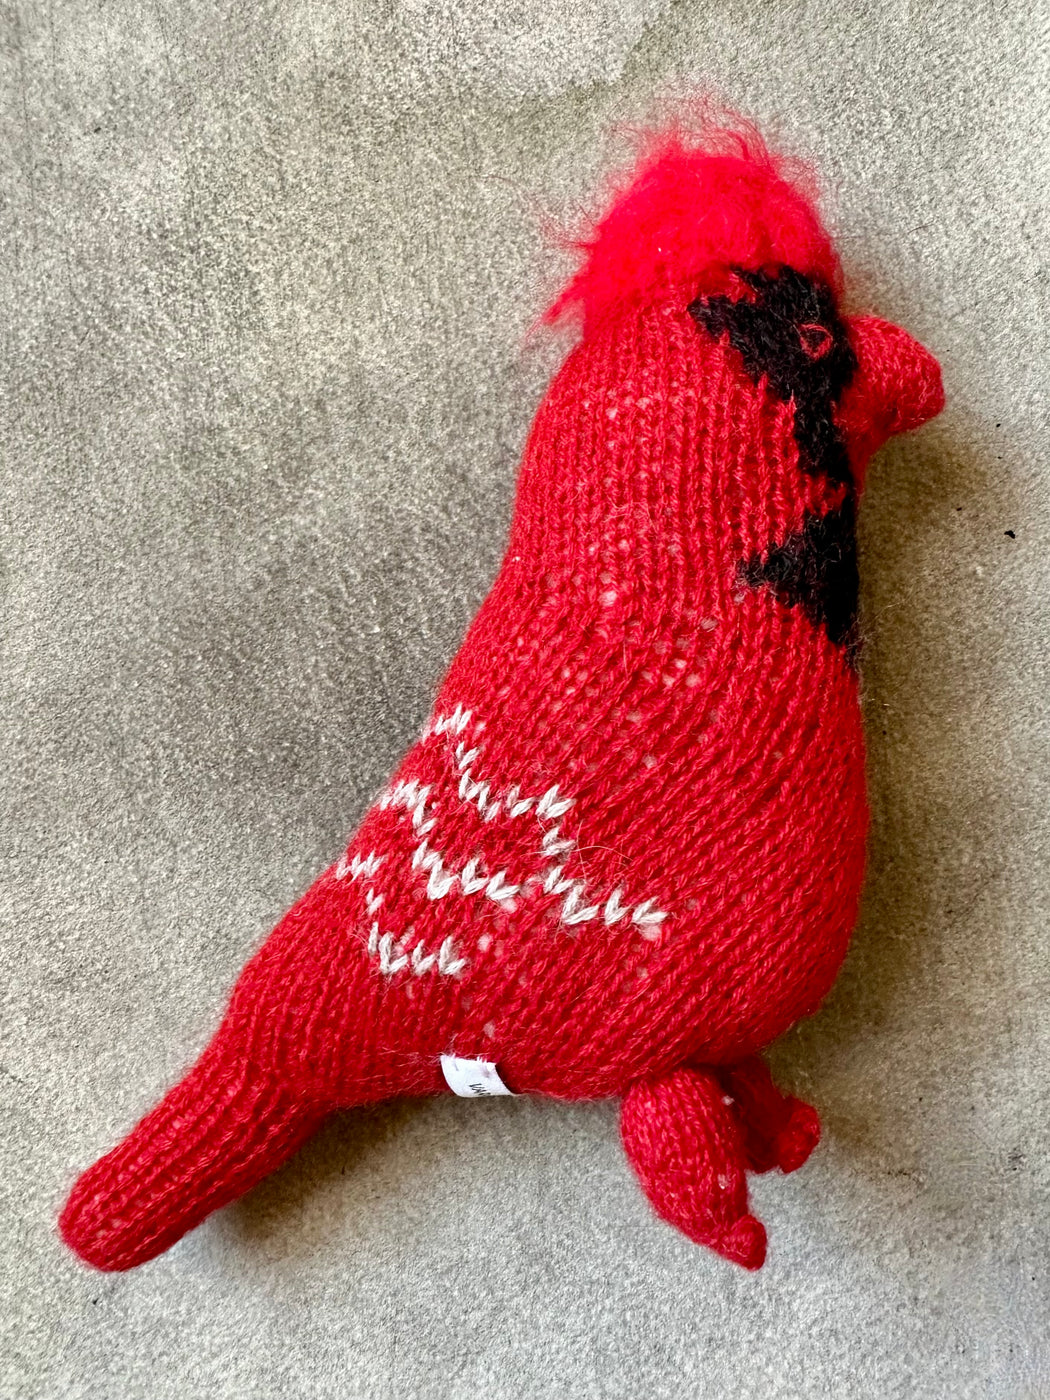 Hand-Knitted Cardinal